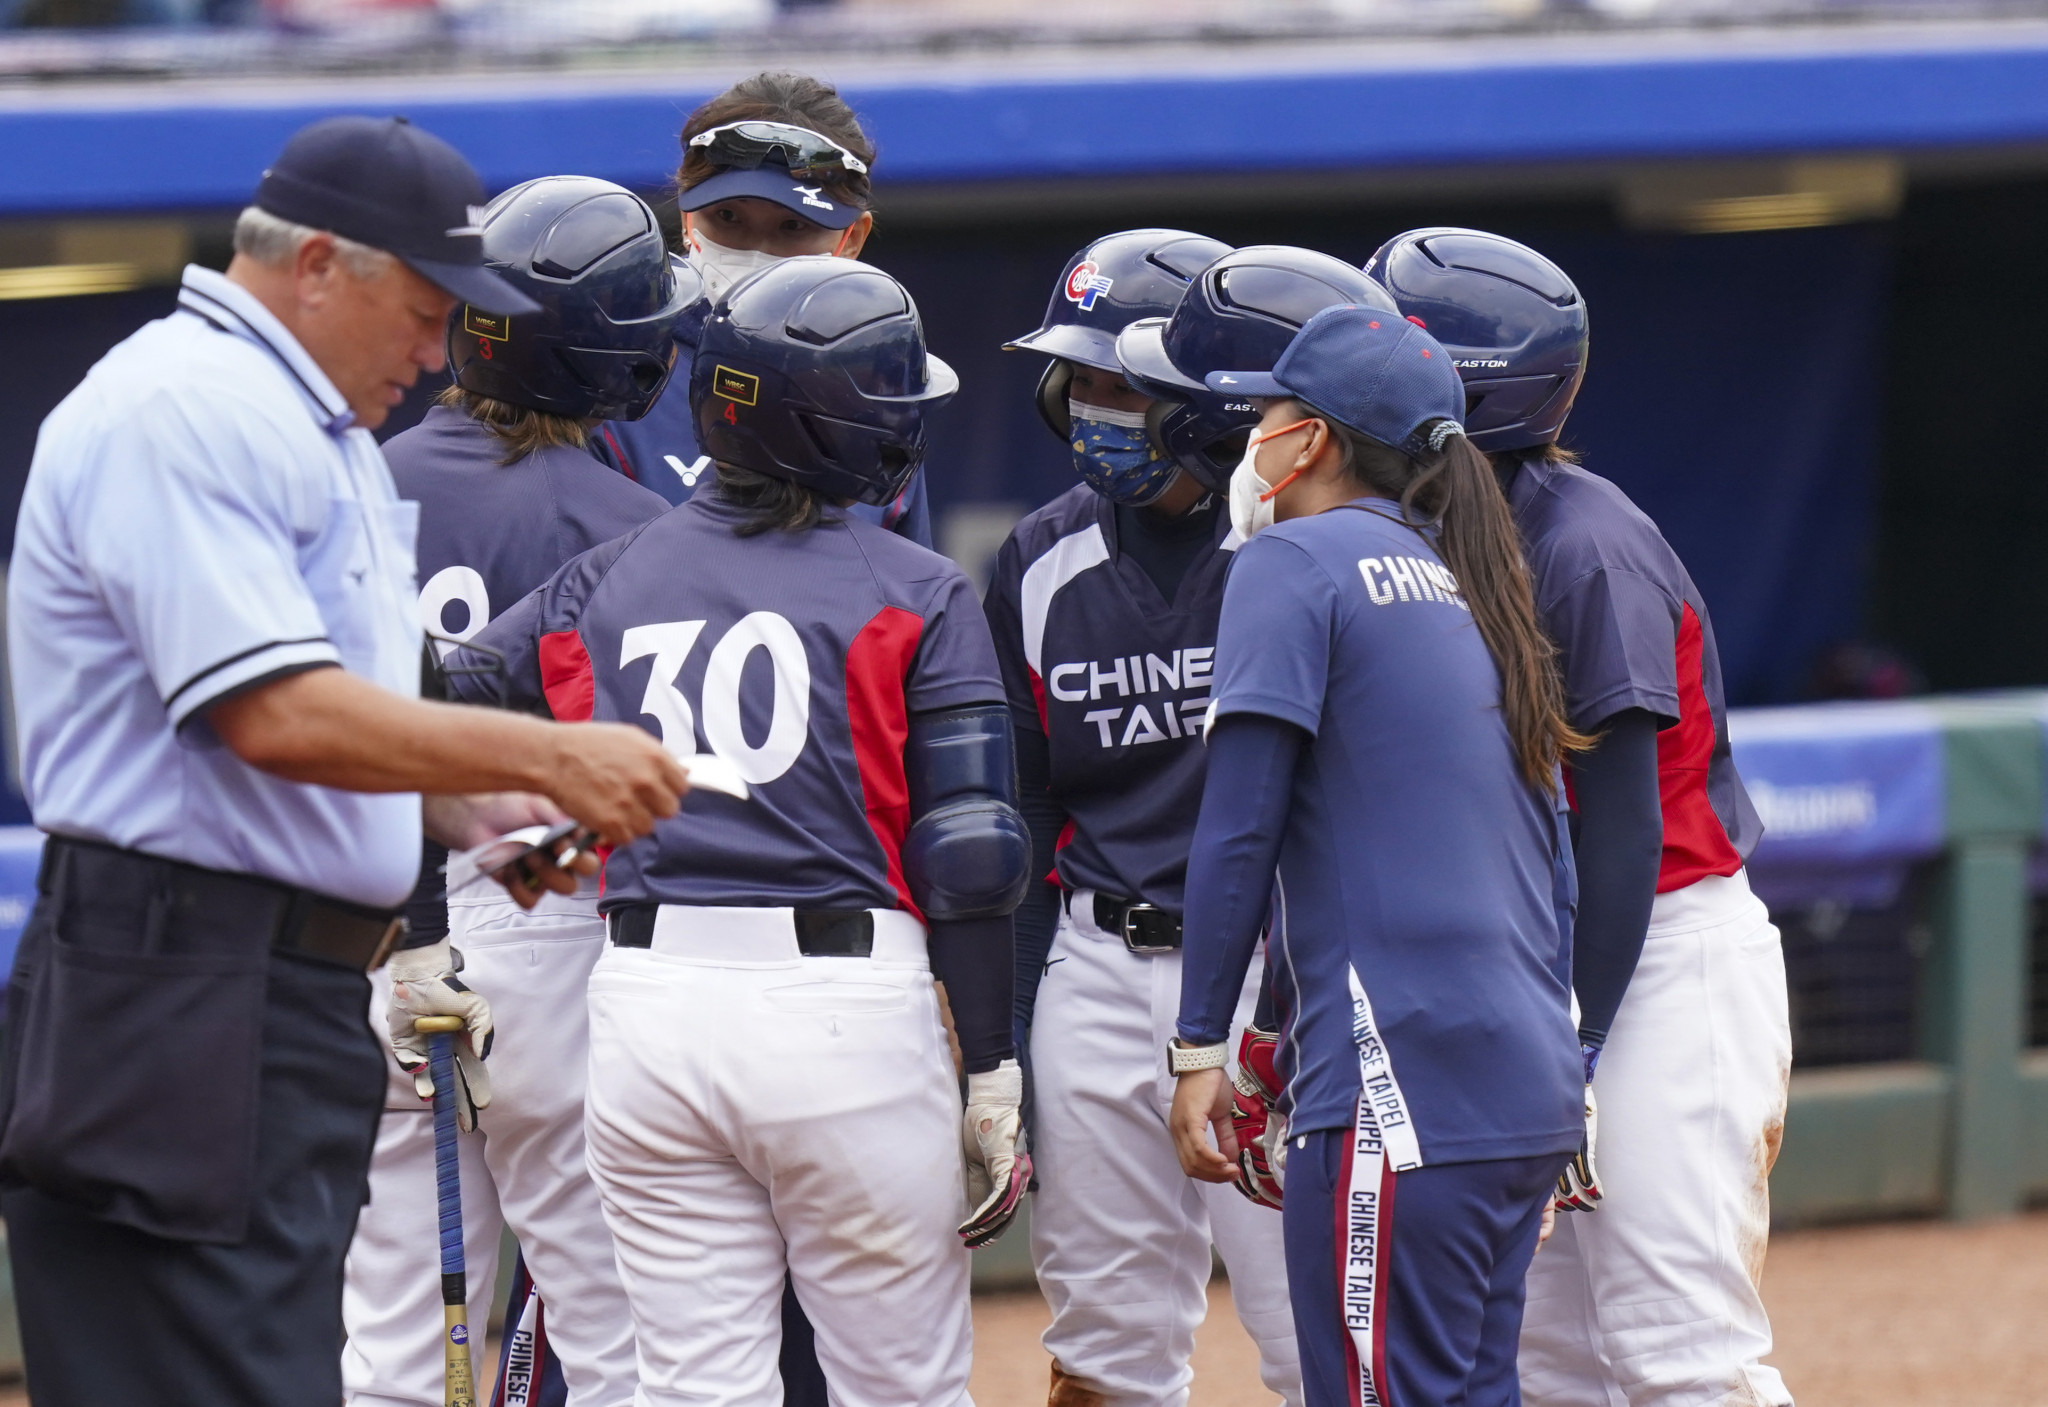 Chinese Taipei's bronze was their first medal in women's softball at World Championships level since 2002 ©The World Games 2022